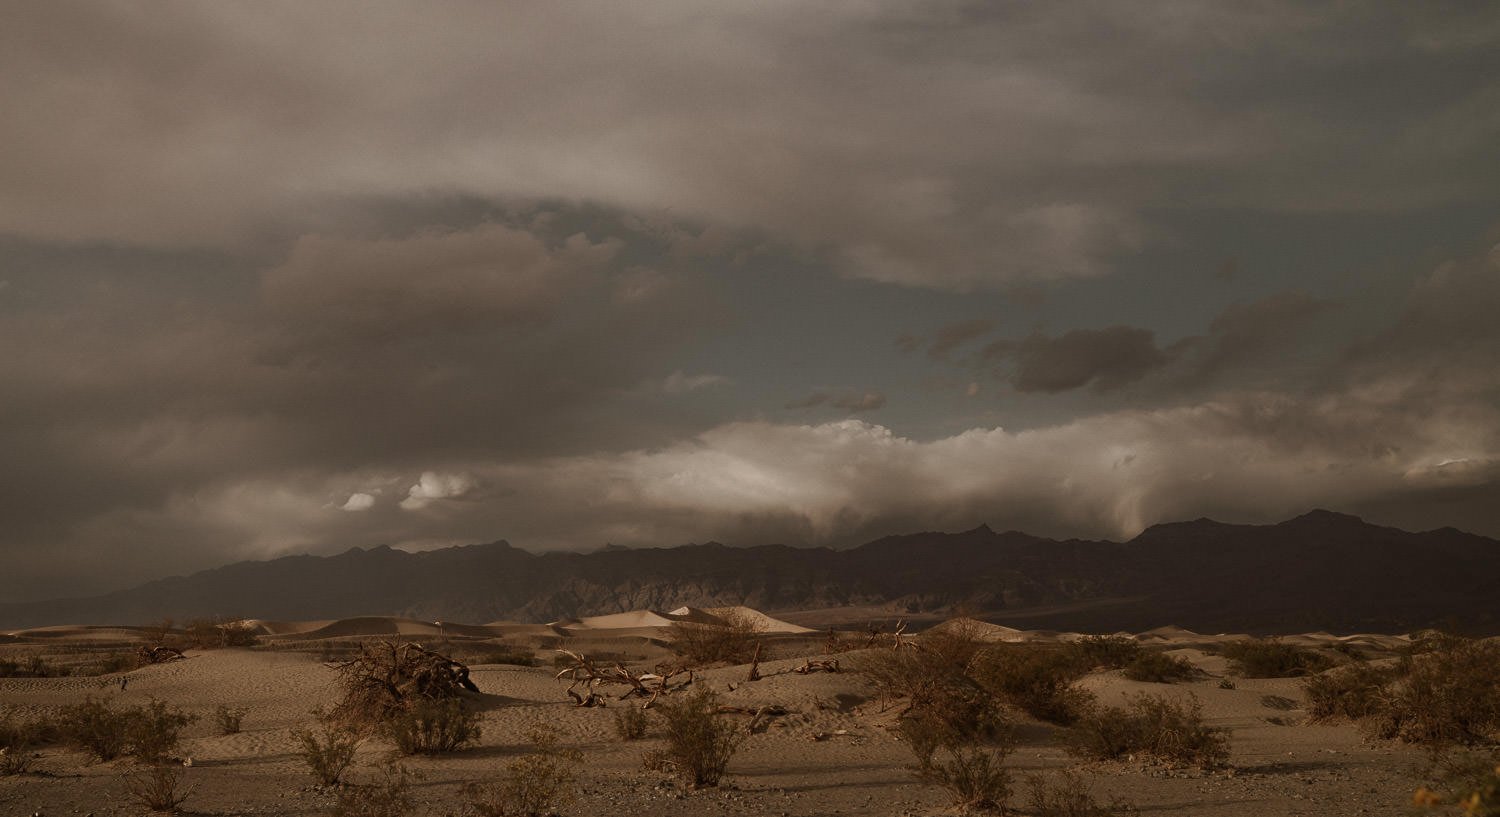 Moody desert elopement in the sand dunes. Cloud cover makes the mountains look purple in the distance